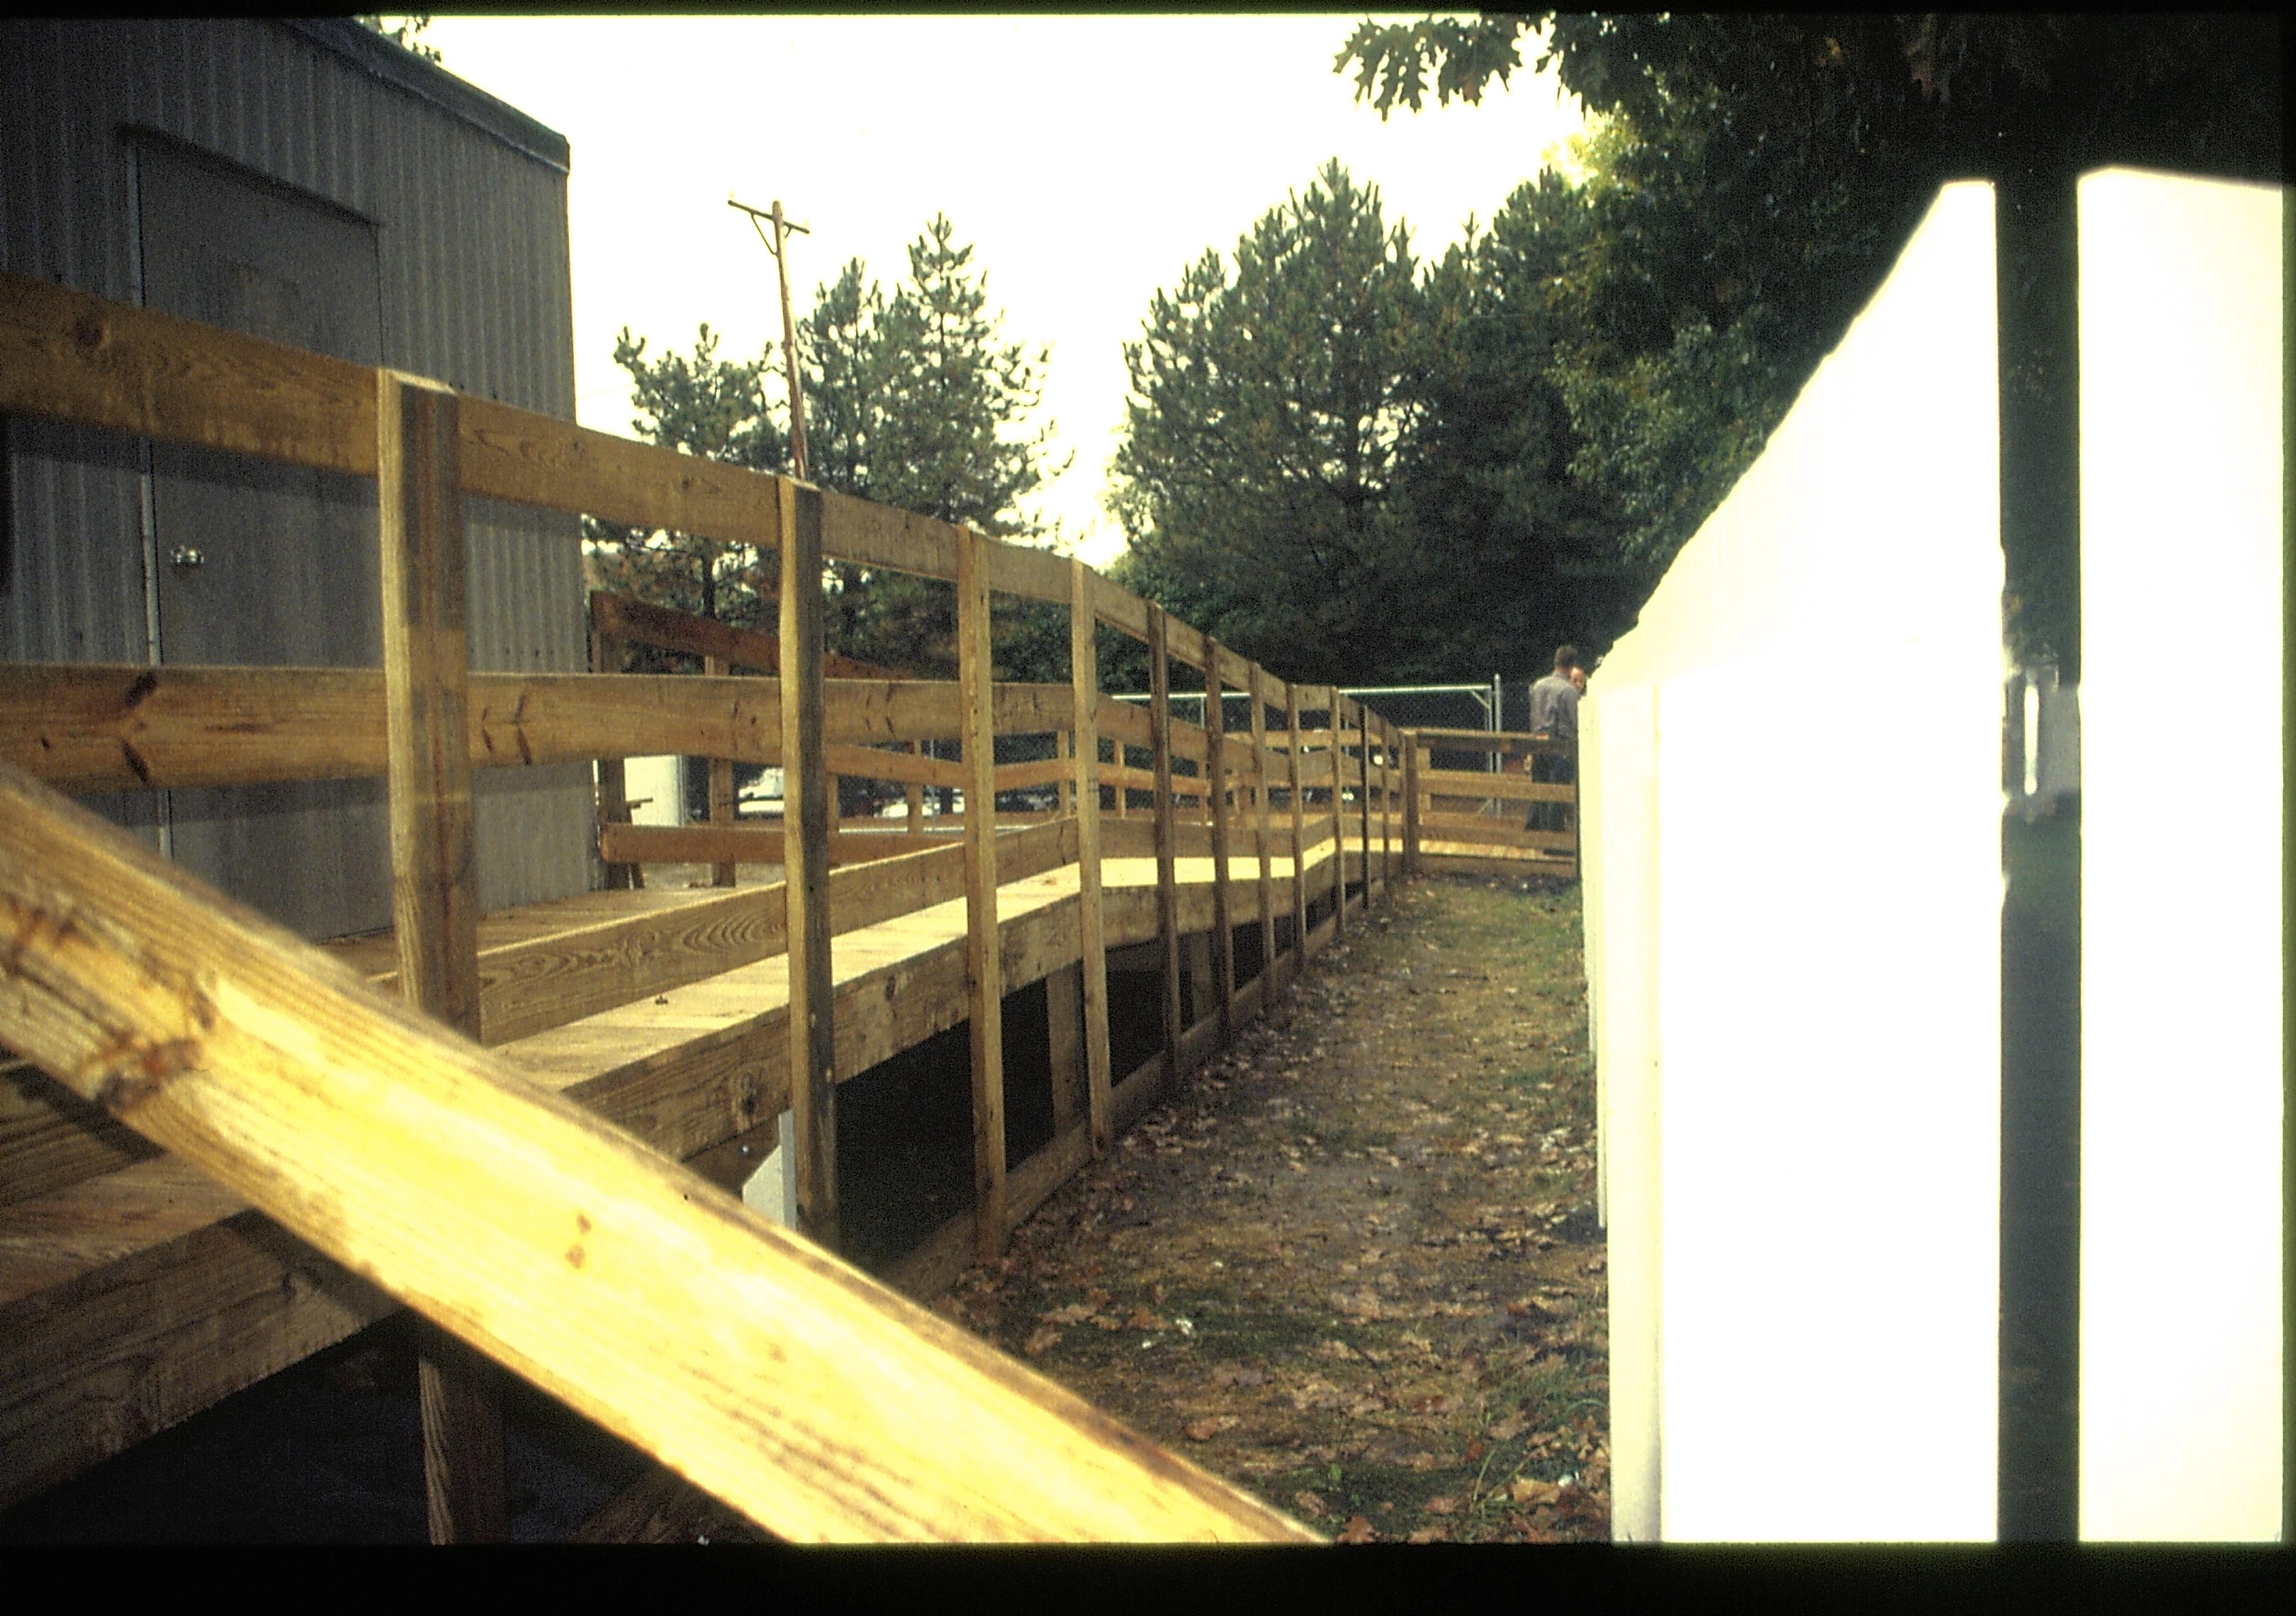 Restroom trailer access ramp Lincoln Home NHS- Visitor Center remodel,  Roll 1999-11 exp 5 Visitor Center, Corneau, restroom, temporary